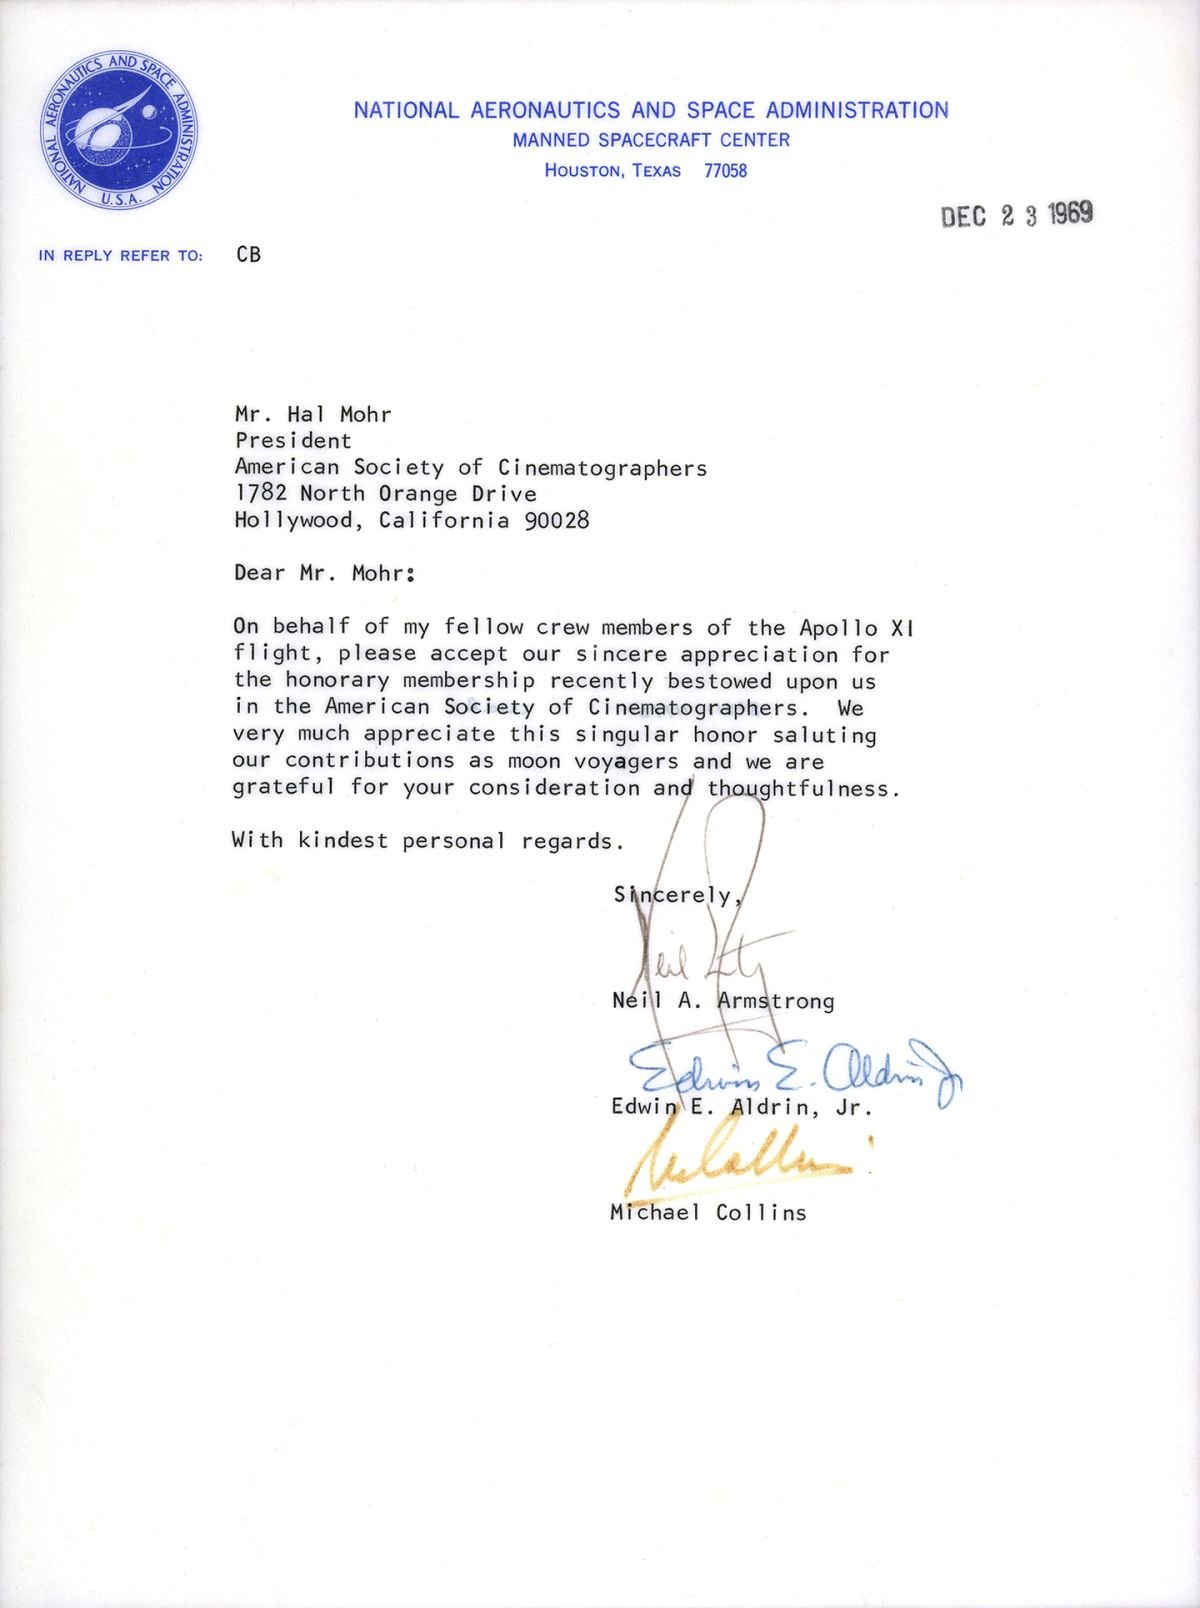 This letter is currently on display at the ASC Clubhouse.